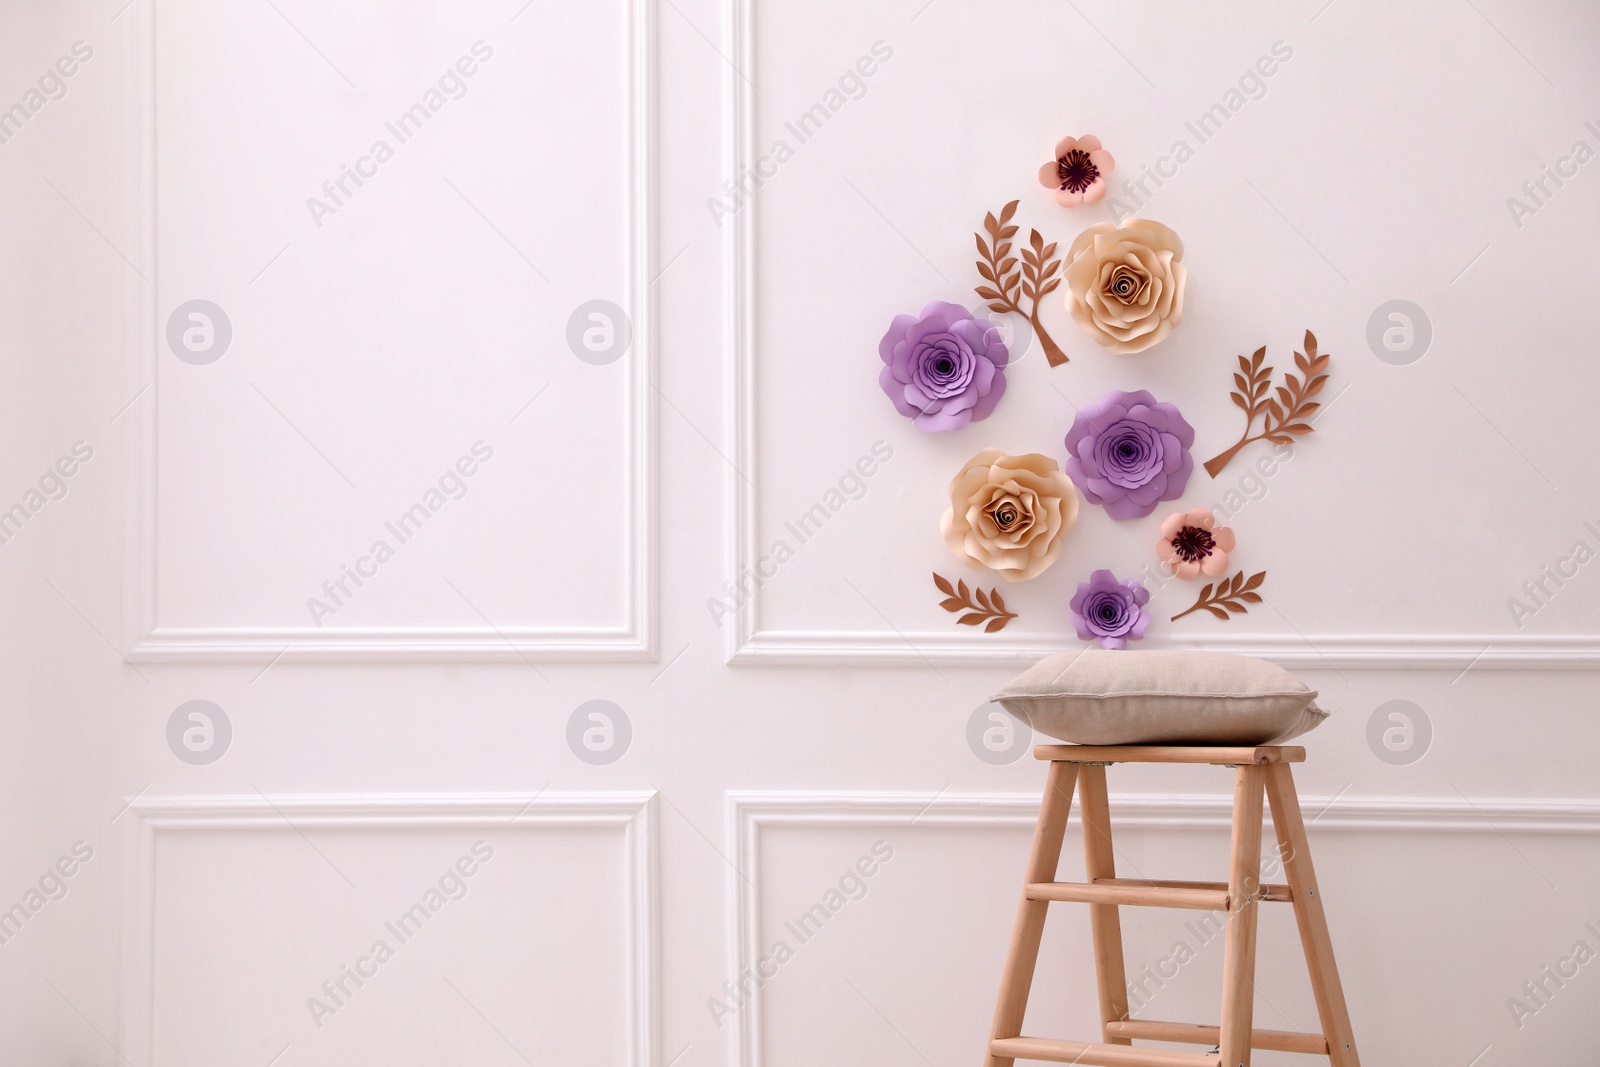 Photo of Stylish room interior with floral decor and wooden stand, space for text